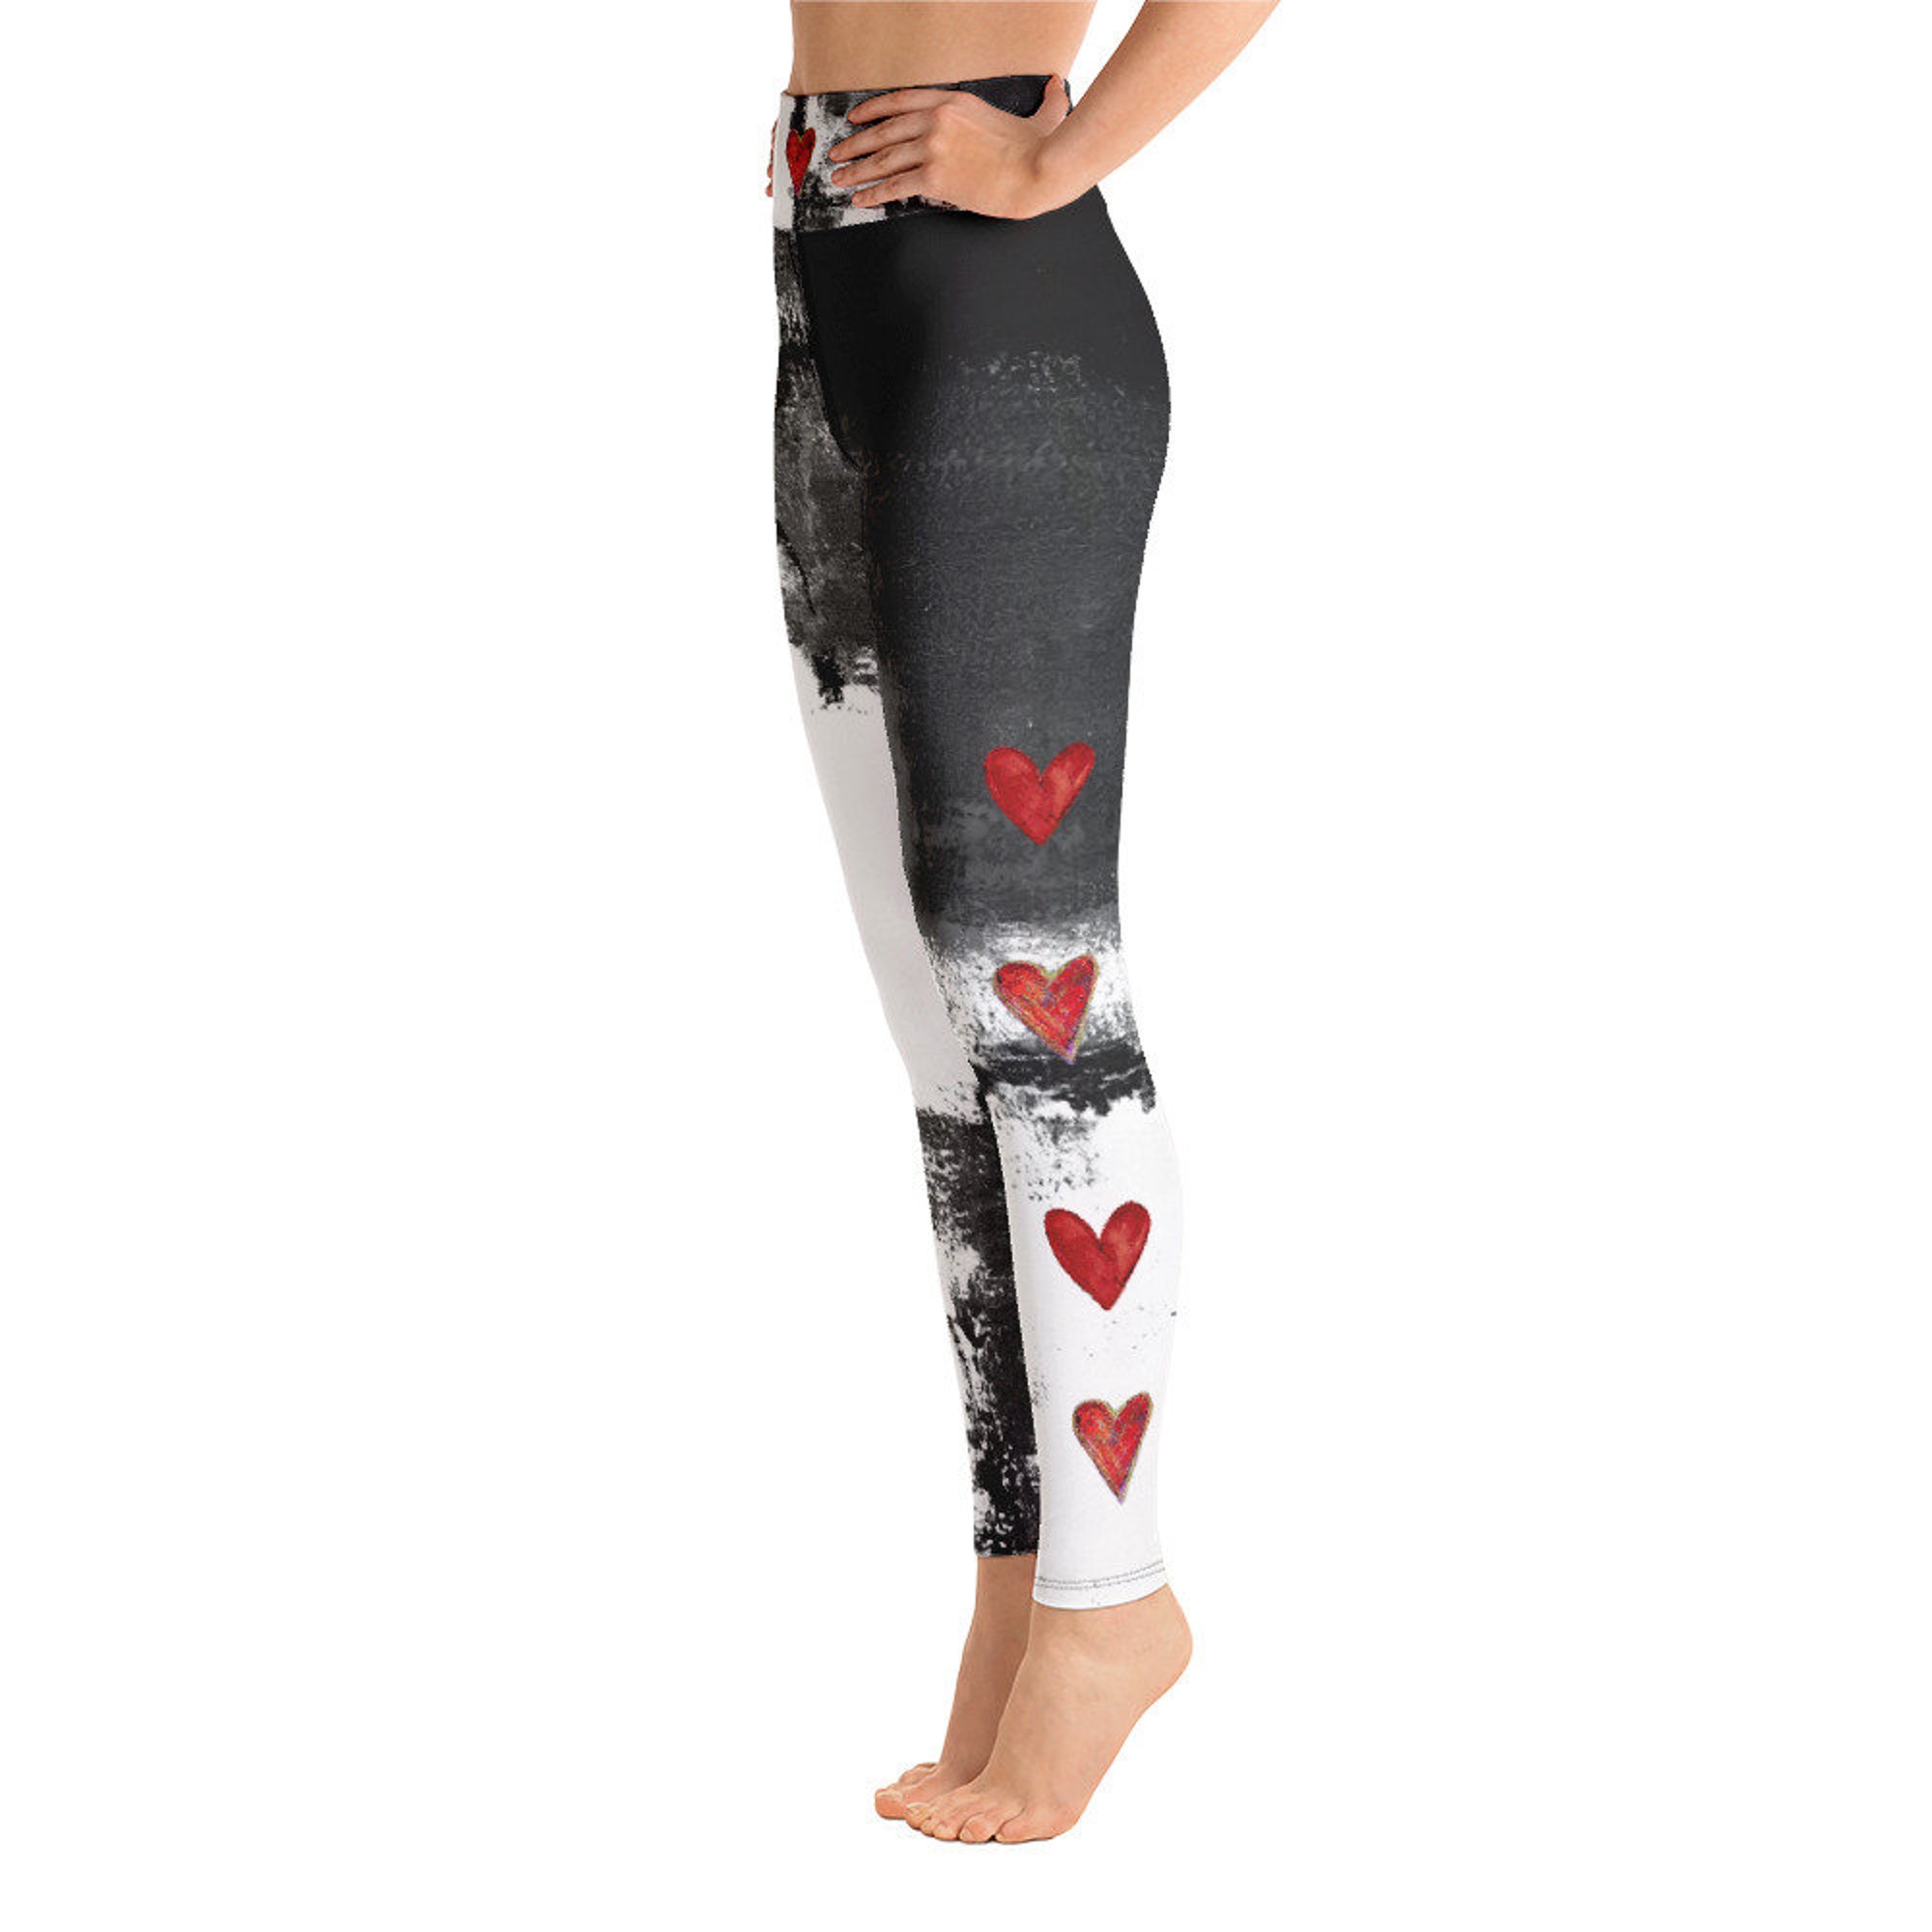 Discover Abstract Woman Black and White with Red Hearts High-Waist Leggings